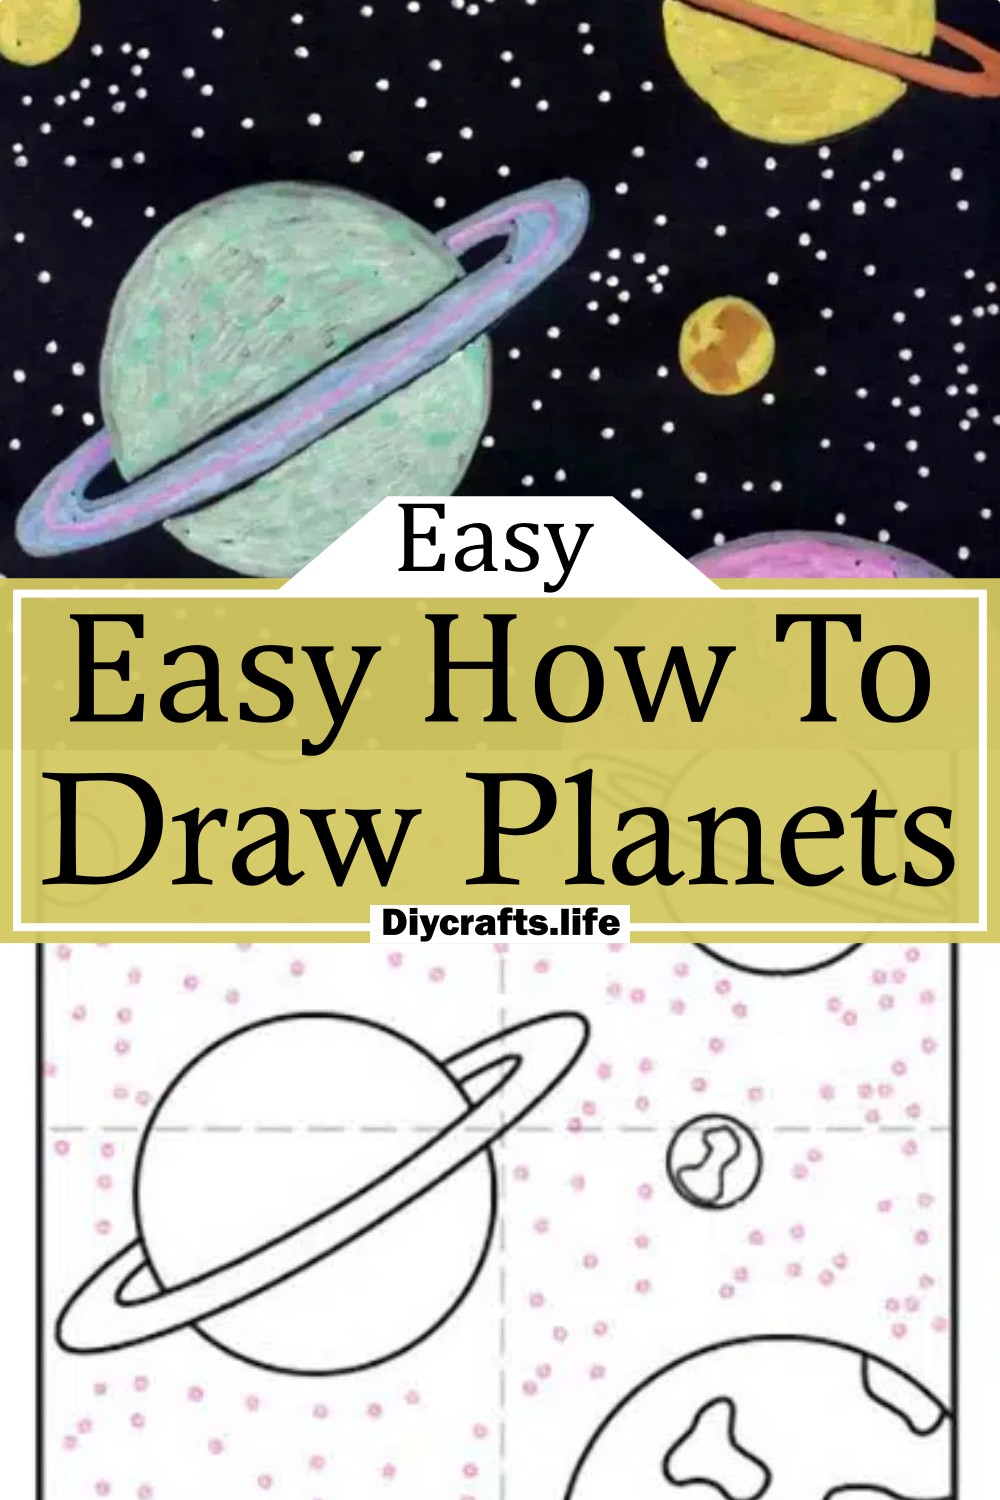 Easy How To Draw Planets